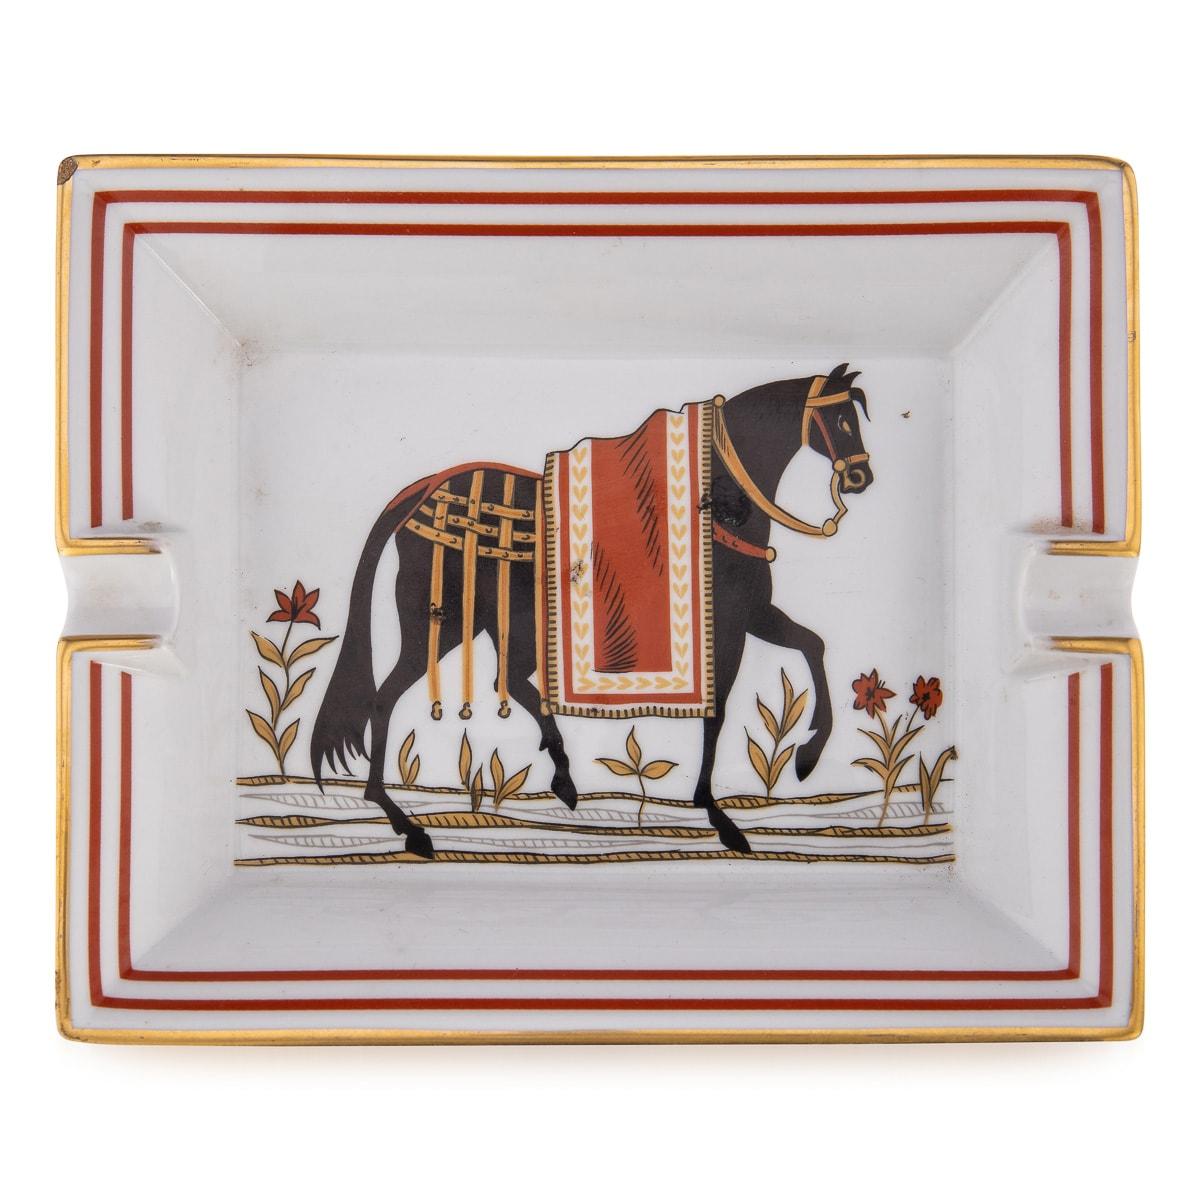 A ceramic ashtray by Hermes, made in France in the latter half of the 20th century. These ashtrays have always been very collectable with the vintage models in particular. This one has a lovely equestrian theme, a lovely decorative addition to any